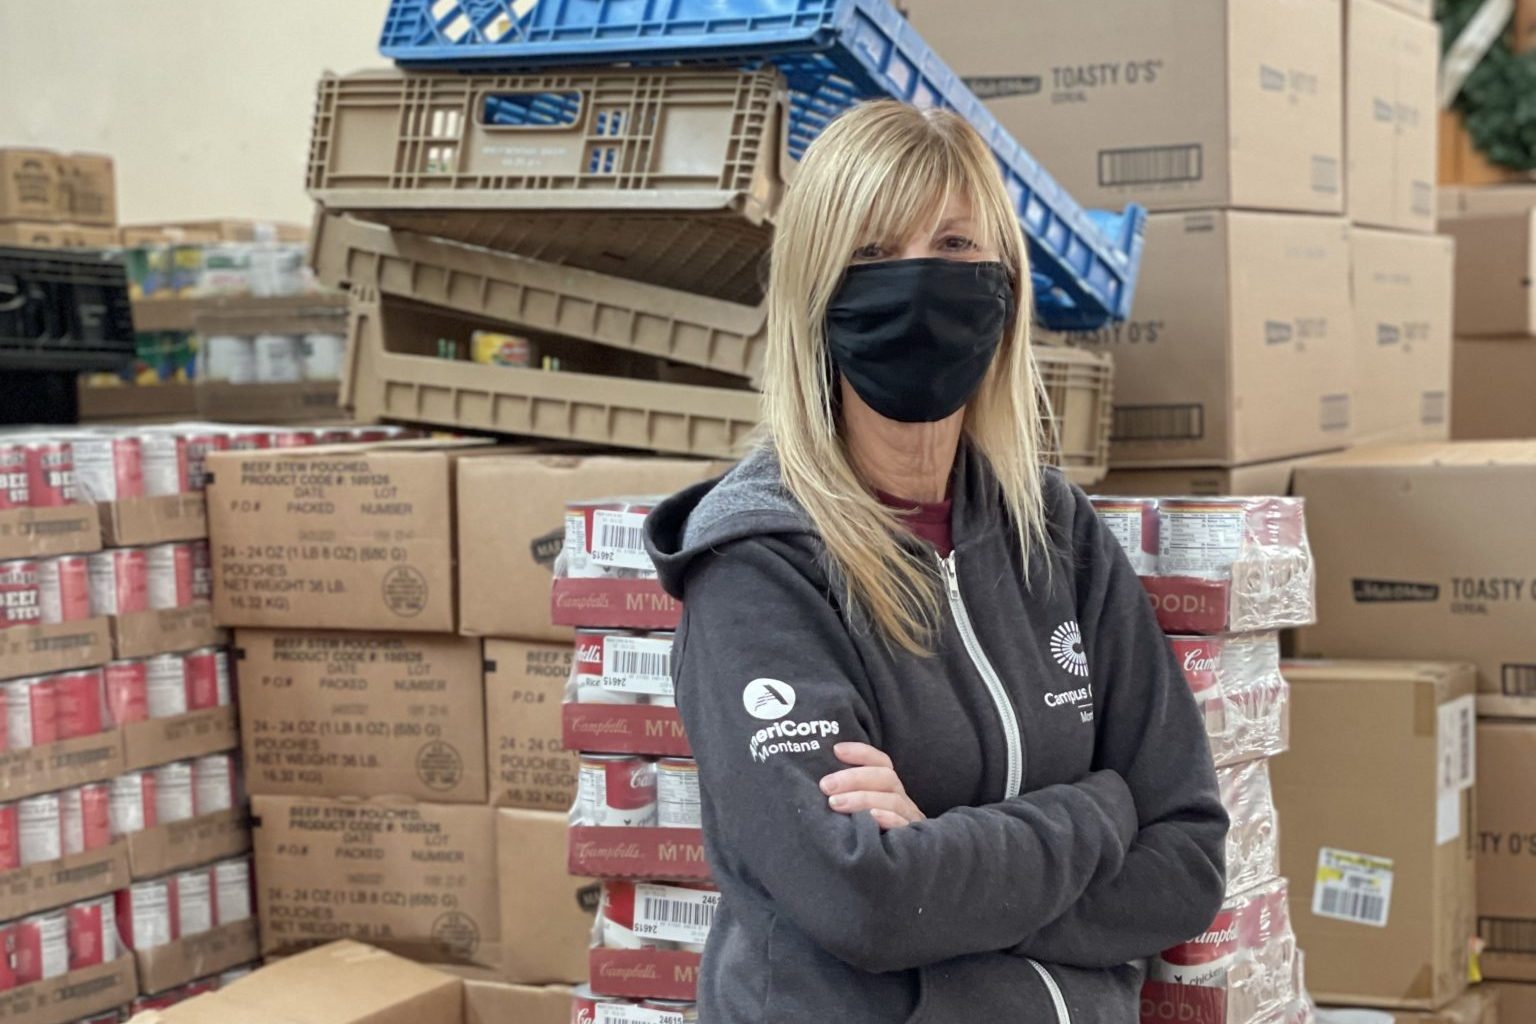 An AmeriCorps member standing in front of boxes of donated food.